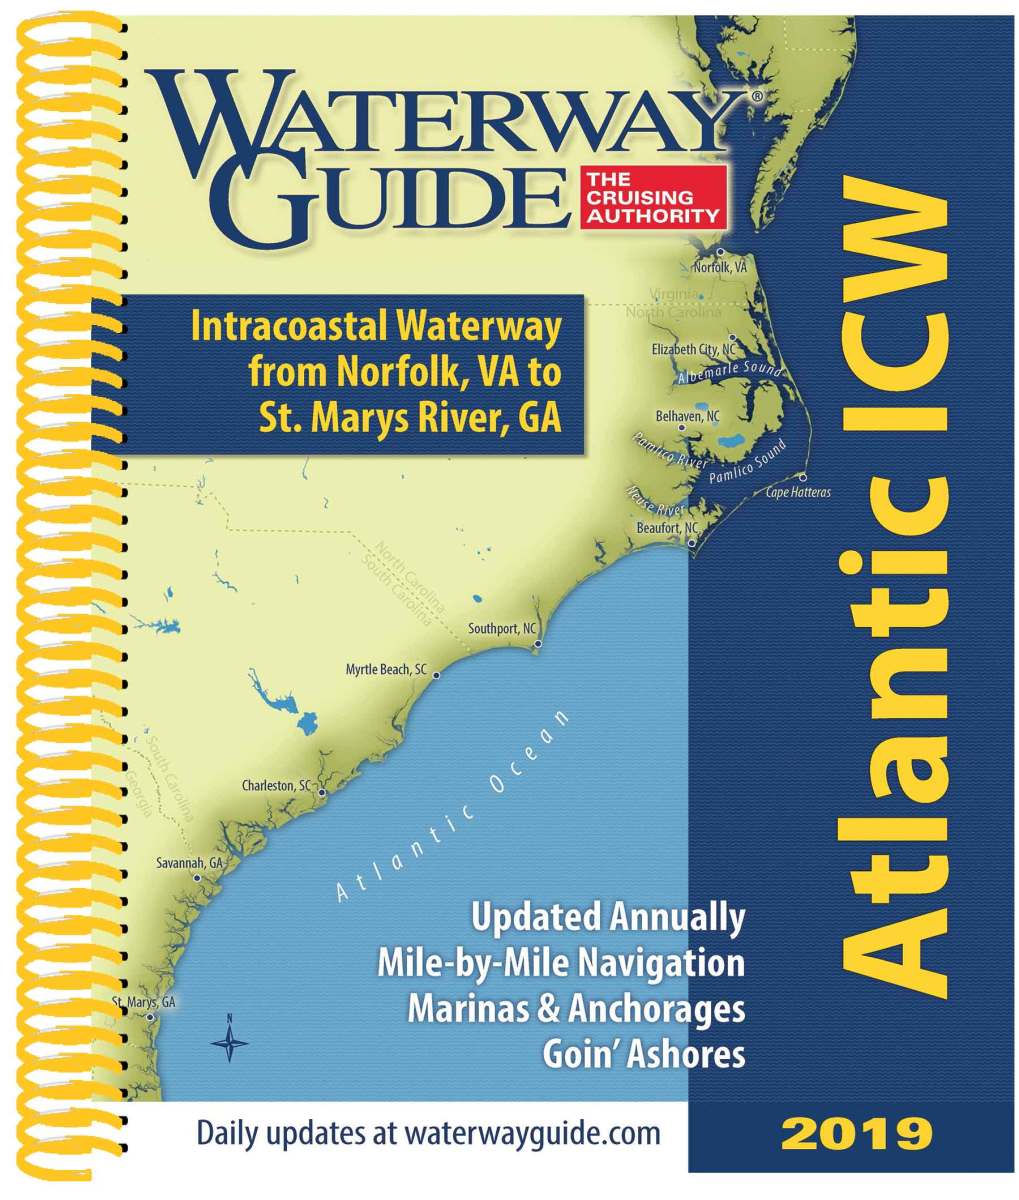 $45.99 via the Waterway Guide Ship Store